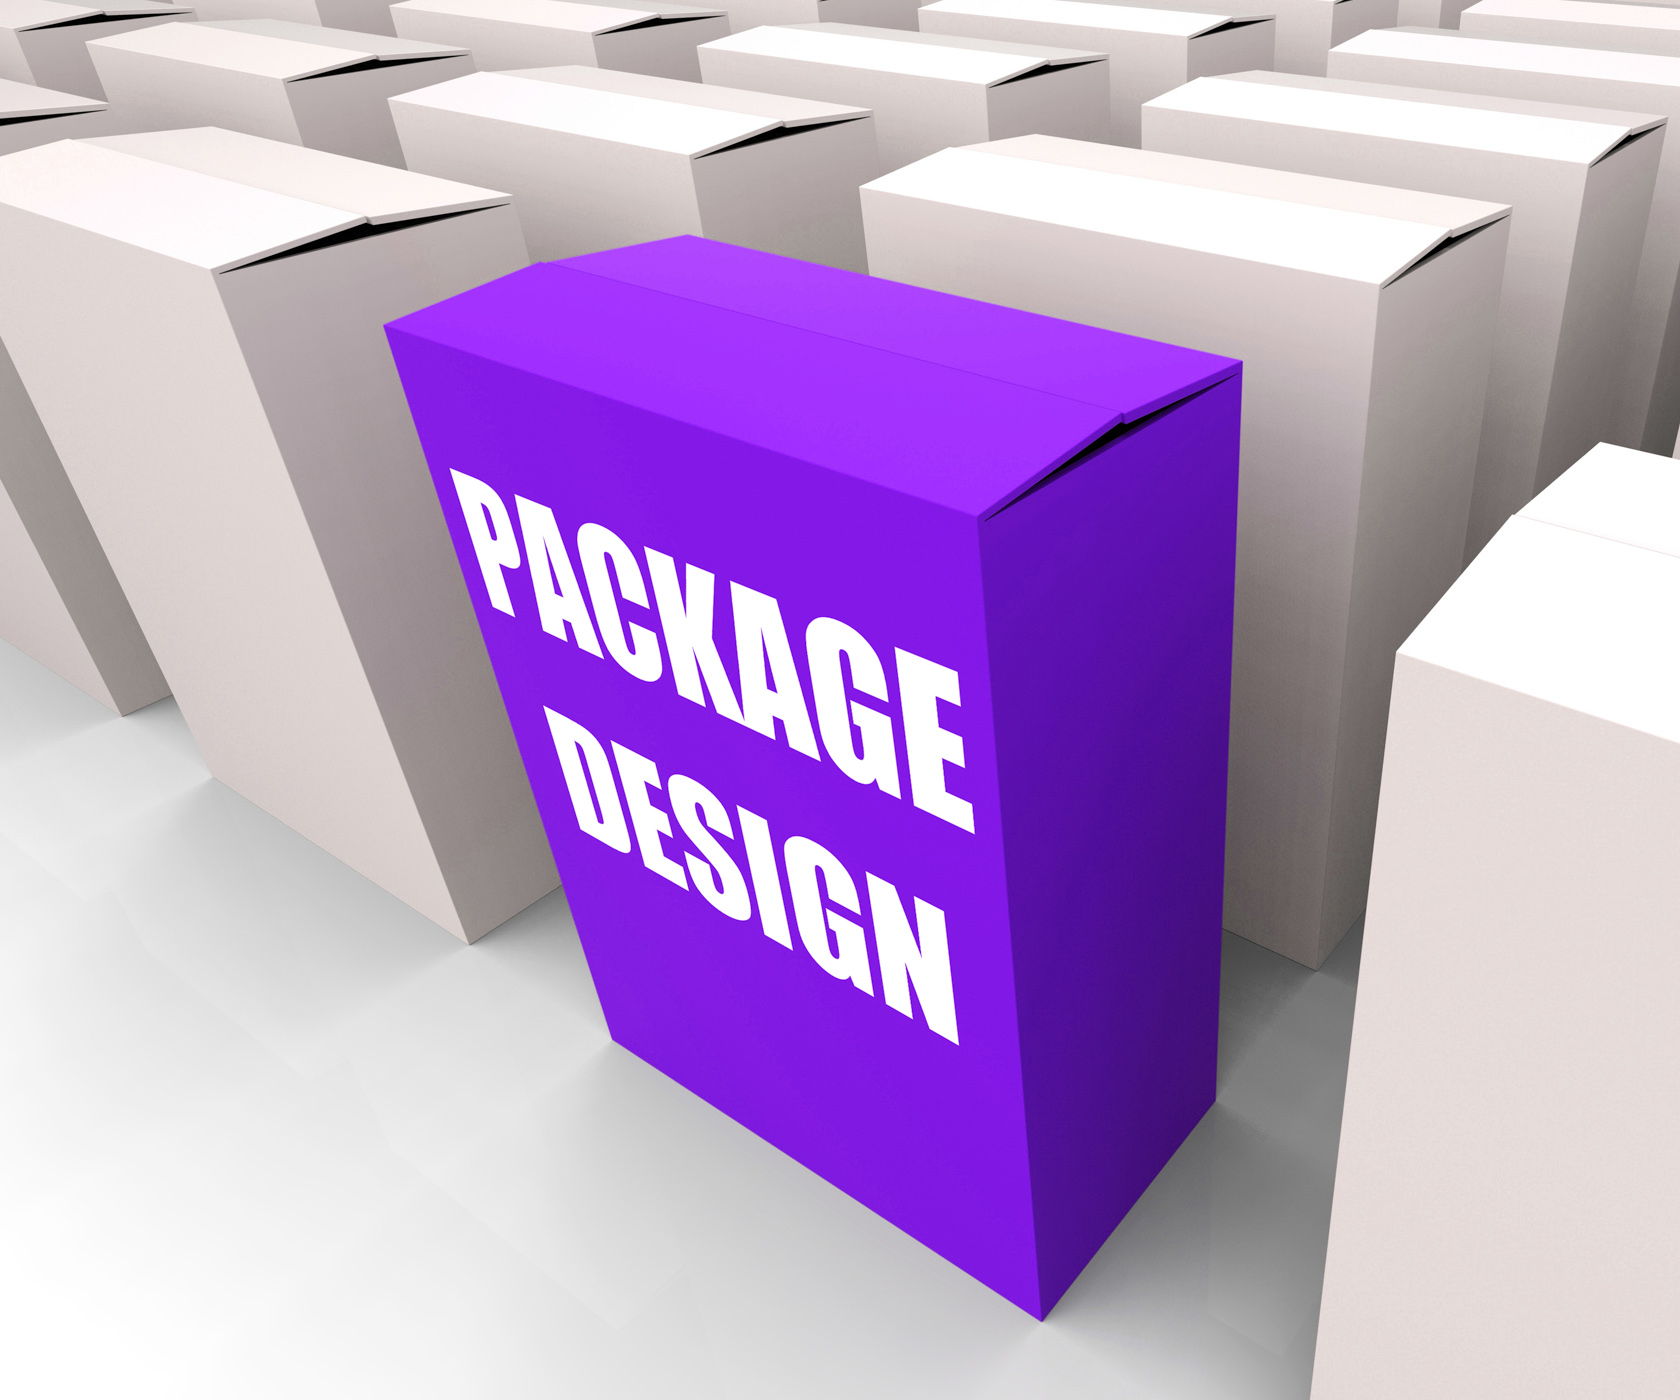 Package Design Box Infers Designing Packages or Containers, Arrangement, Designed, Packages, Package, HQ Photo